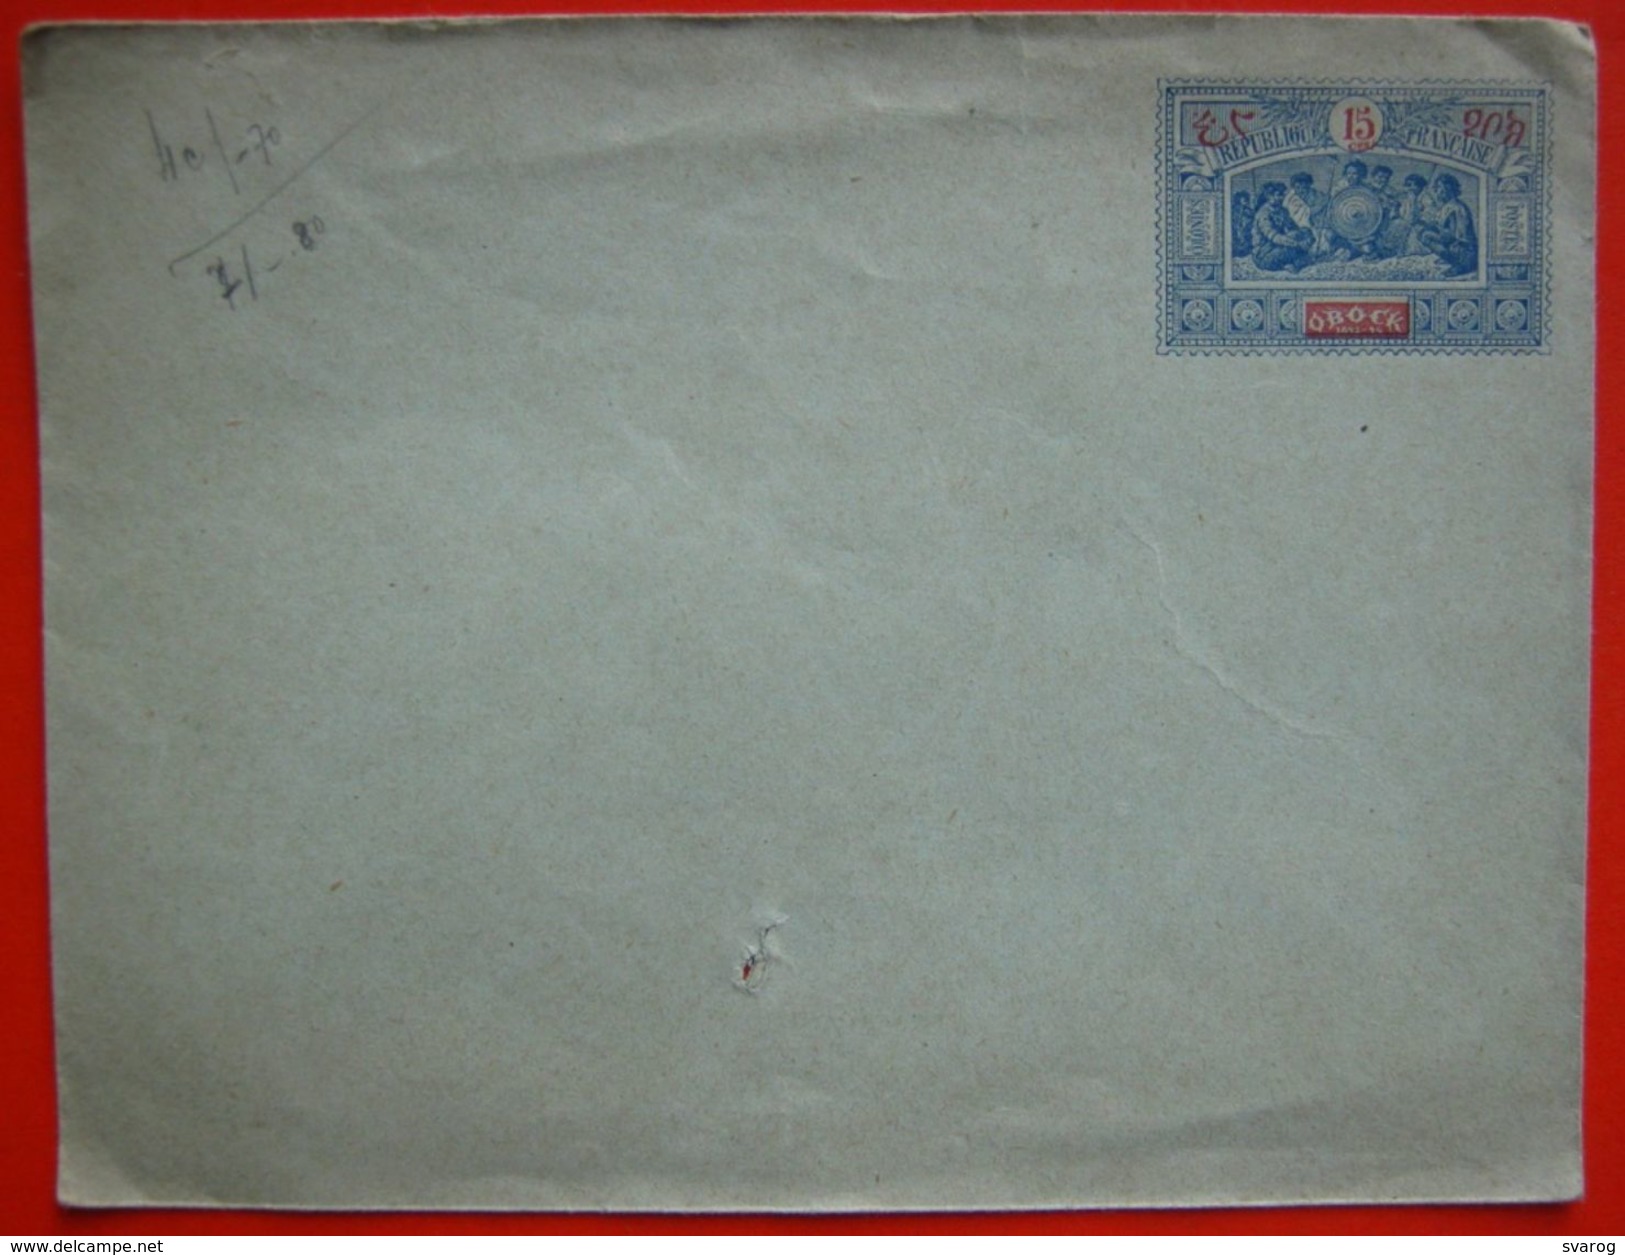 FRANCE - Lettre Colonies Postes OBOCK Postal Stationery 15c. Postally Unused. YU10/124 - Covers & Documents